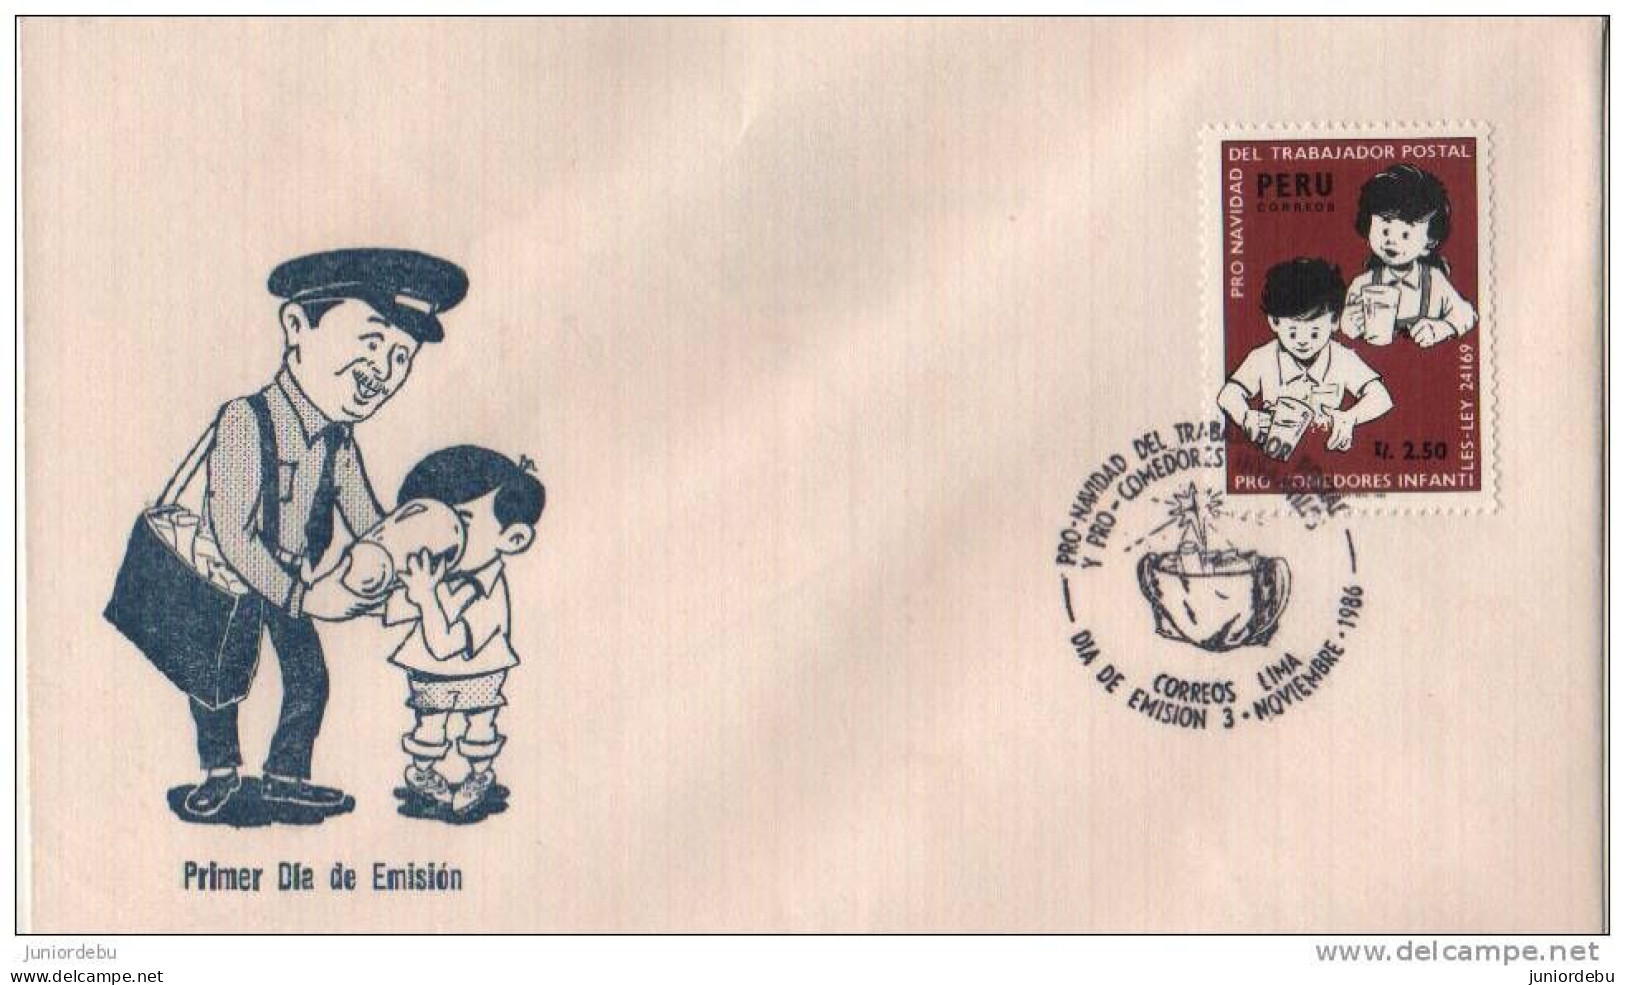 Peru - 1986 - Postal Workers' Christmas And Children's Restaurant F  - FDC. ( Condition As Per Scan )  ( OL 10/02/2013 ) - Pérou